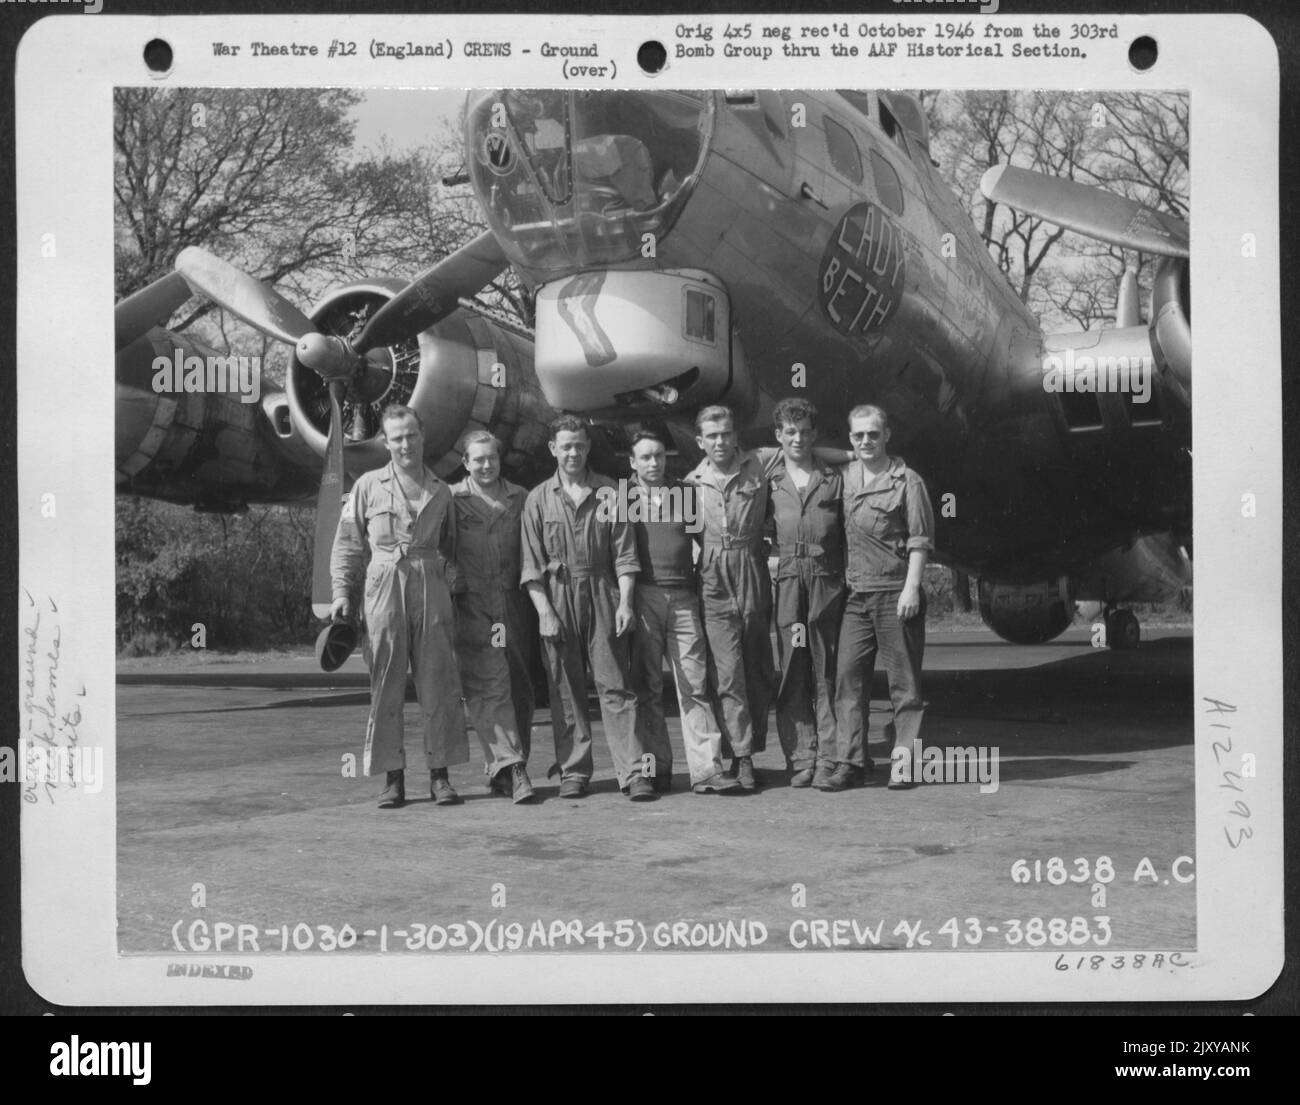 Ground Crew Of The Boeing B-17 'Flying Fortress' 'Lady Beth' Of The 303Rd Bomb Group, Based In England. 19 April 1945. Stock Photo